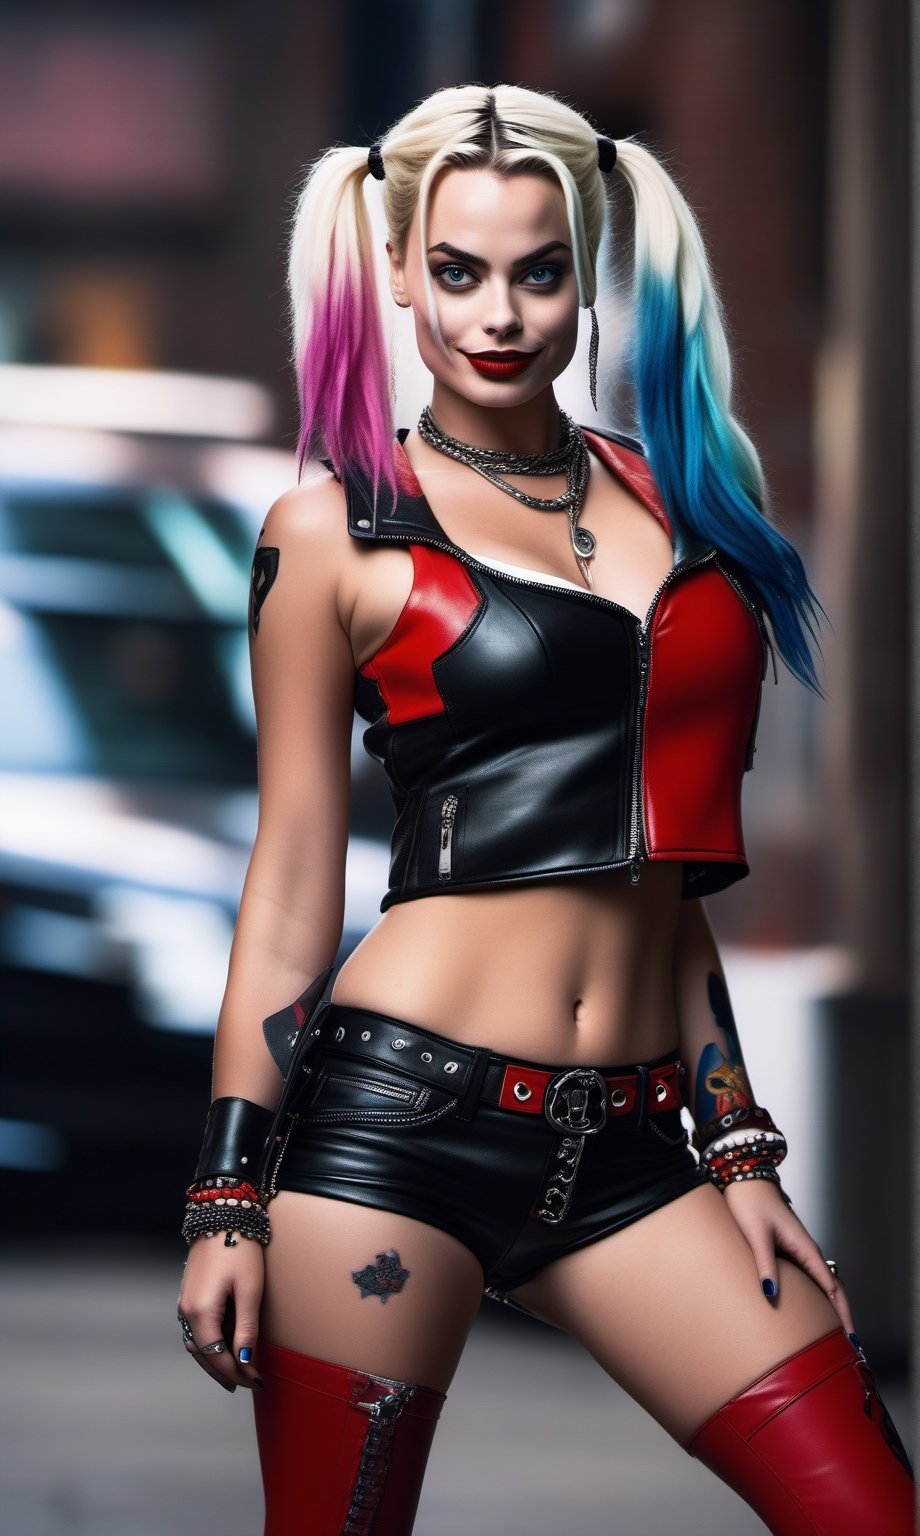 masterpiece, high contrast. 16K resolution, hyper realism, perfect face, detailed eyes, expressive eyes, An edgy 30 years old harley quinn punk-rock very sexy beauty busty with rebelious energy,Margot Robbie, wearing a leather jacket and leather trouser. Her complexion is adorned with piercings, with an exaggerated face expression , wide angle, full face, very long dreadlocks black hair, HQ, 4k, HQ, HQ”, close up portrait photo by Annie Leibovitz, film, studio lighting, detailed skin, ultra realistic, bokeh, sharp features,old style, grundge style